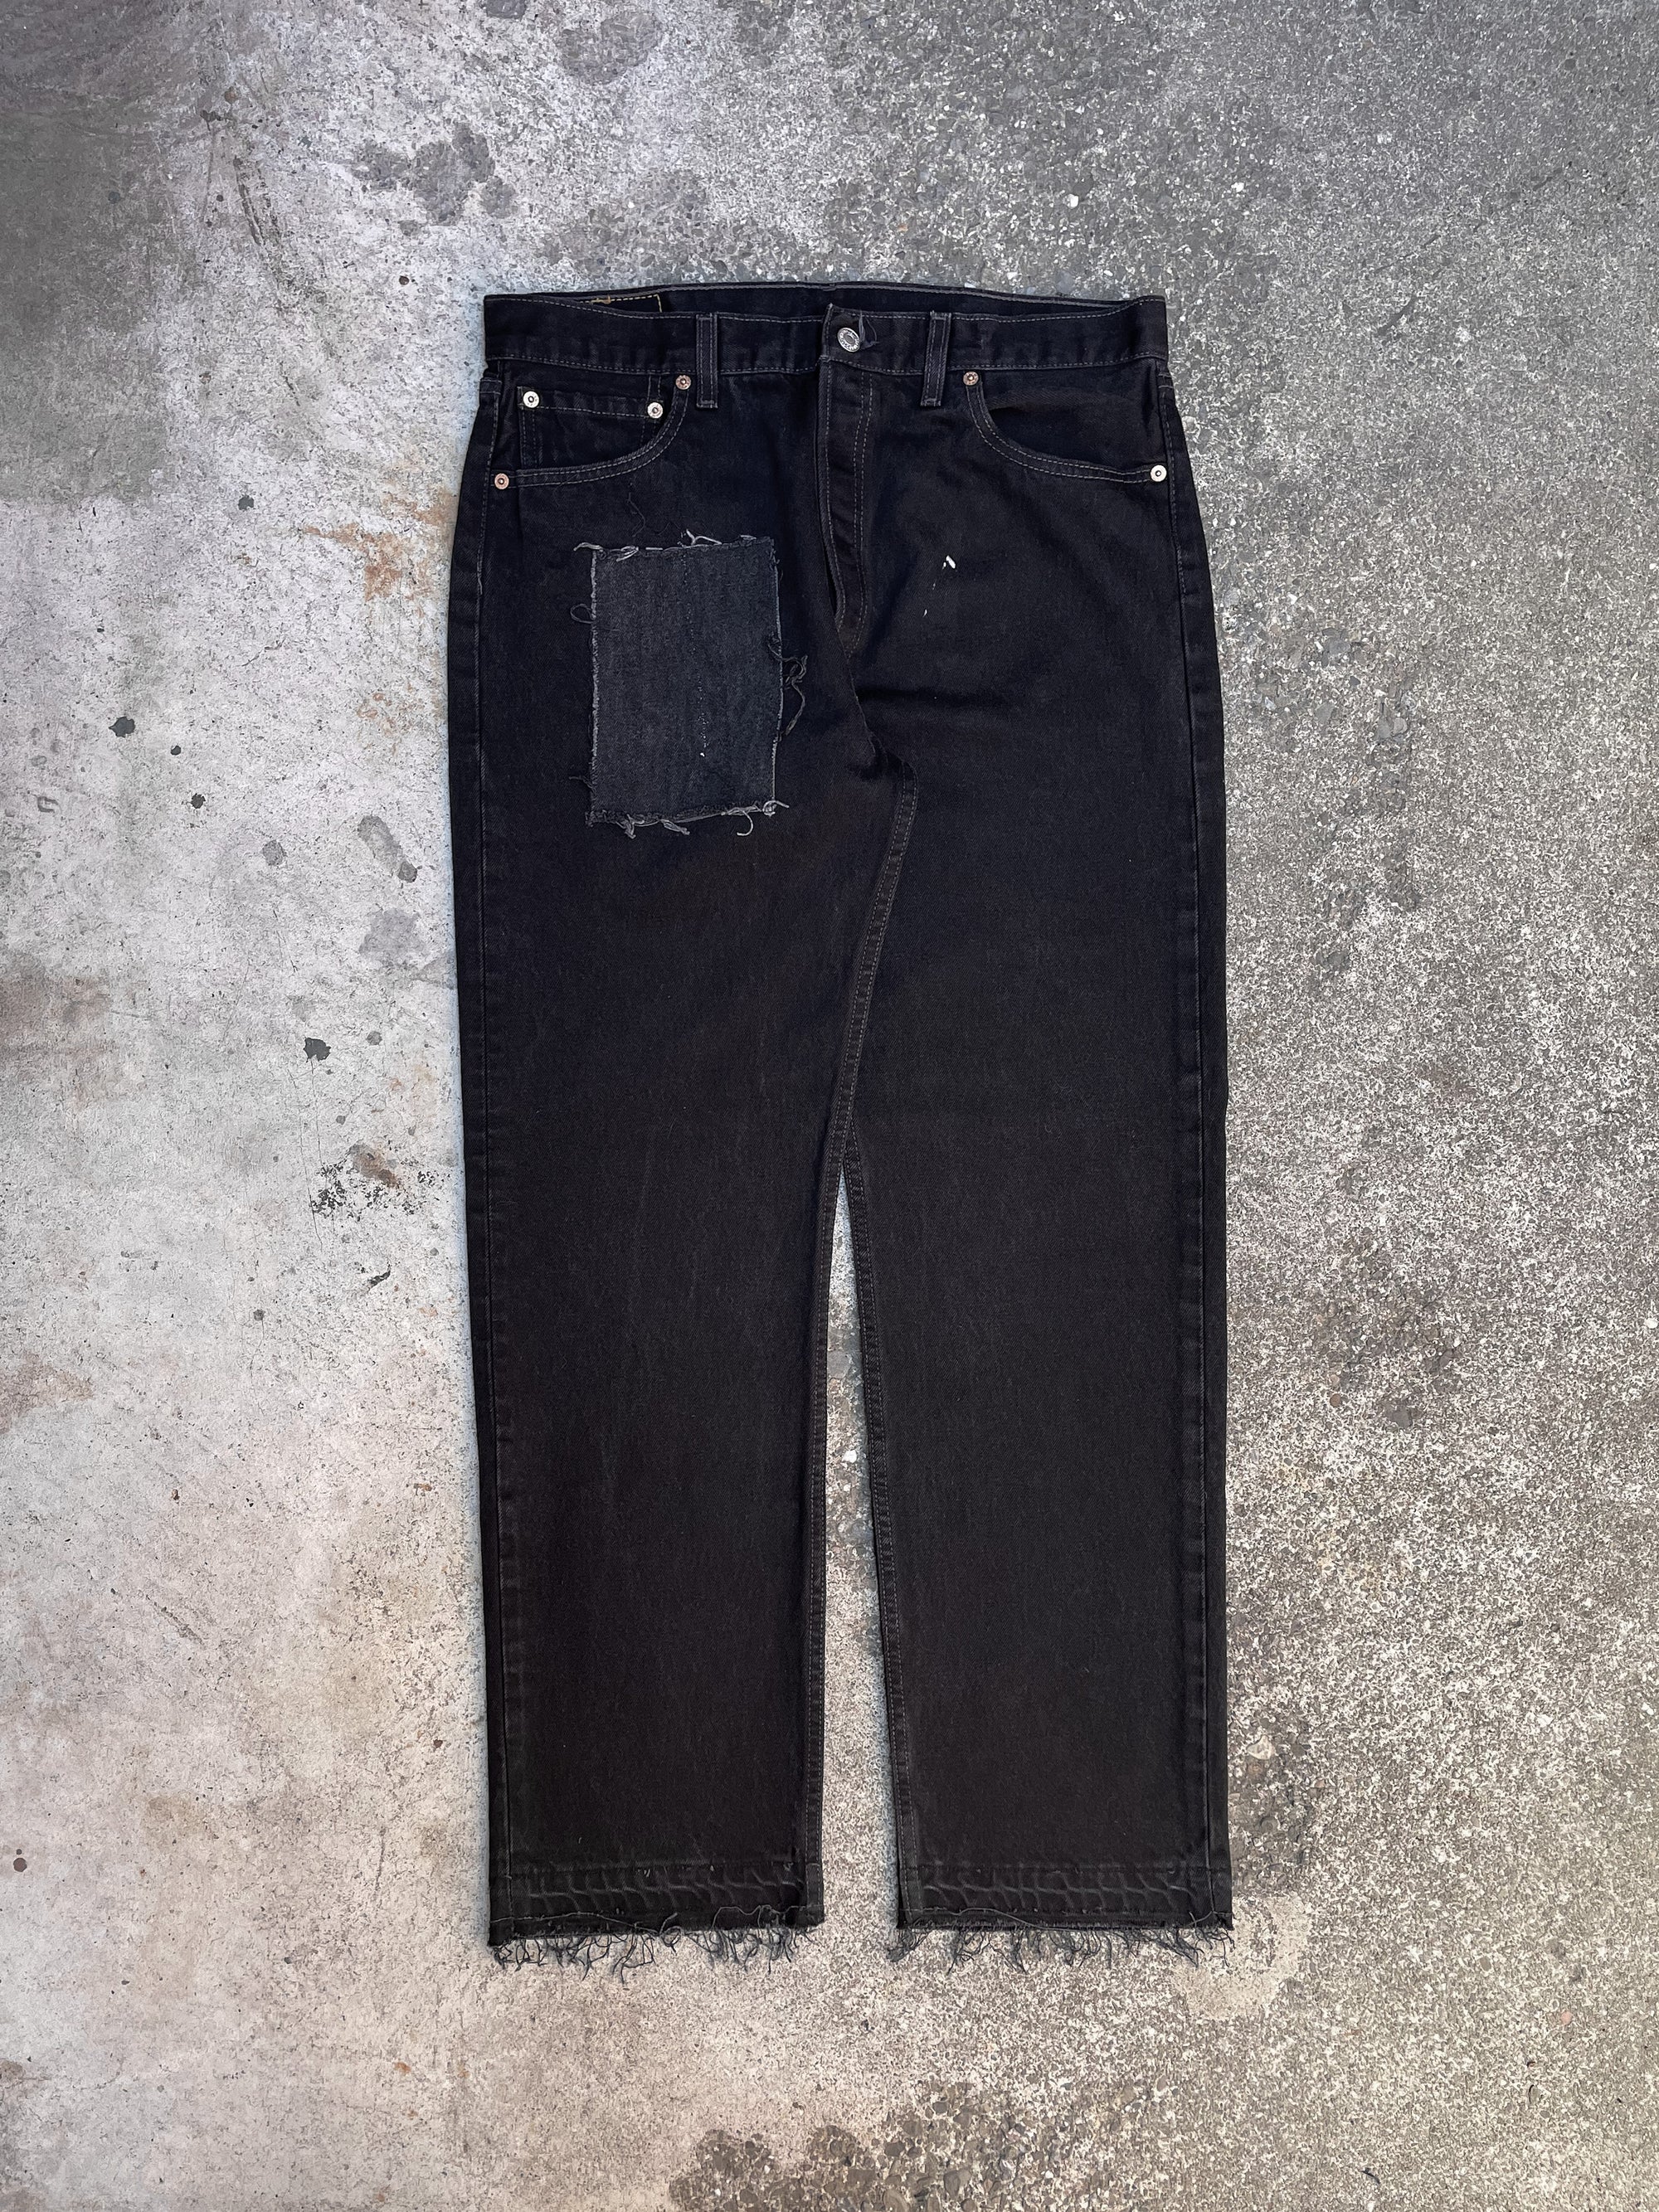 Vintage Levi’s Patch Repaired Black 501 Released Hem (34X30)